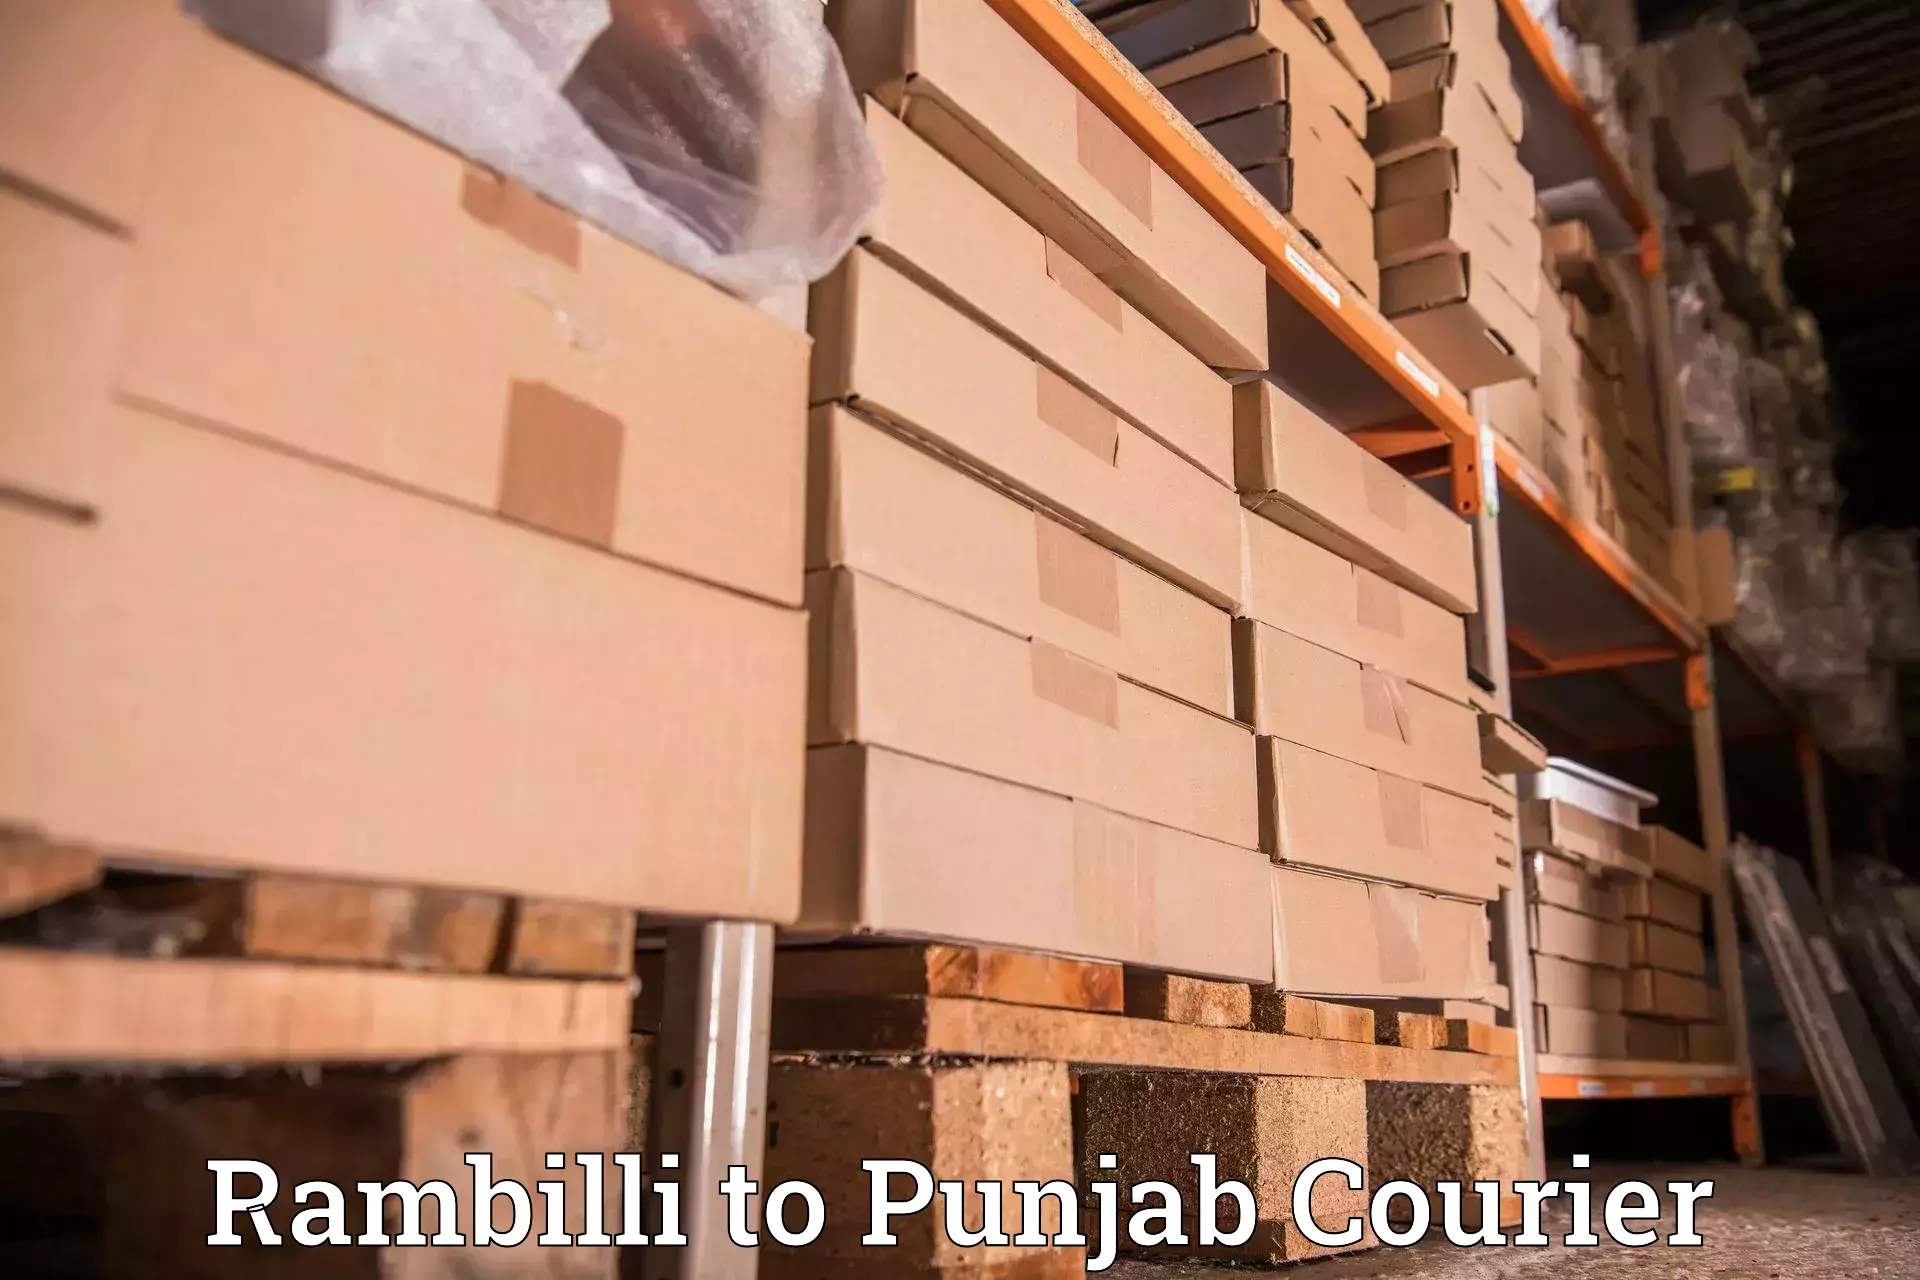 Courier service booking in Rambilli to Zirakpur